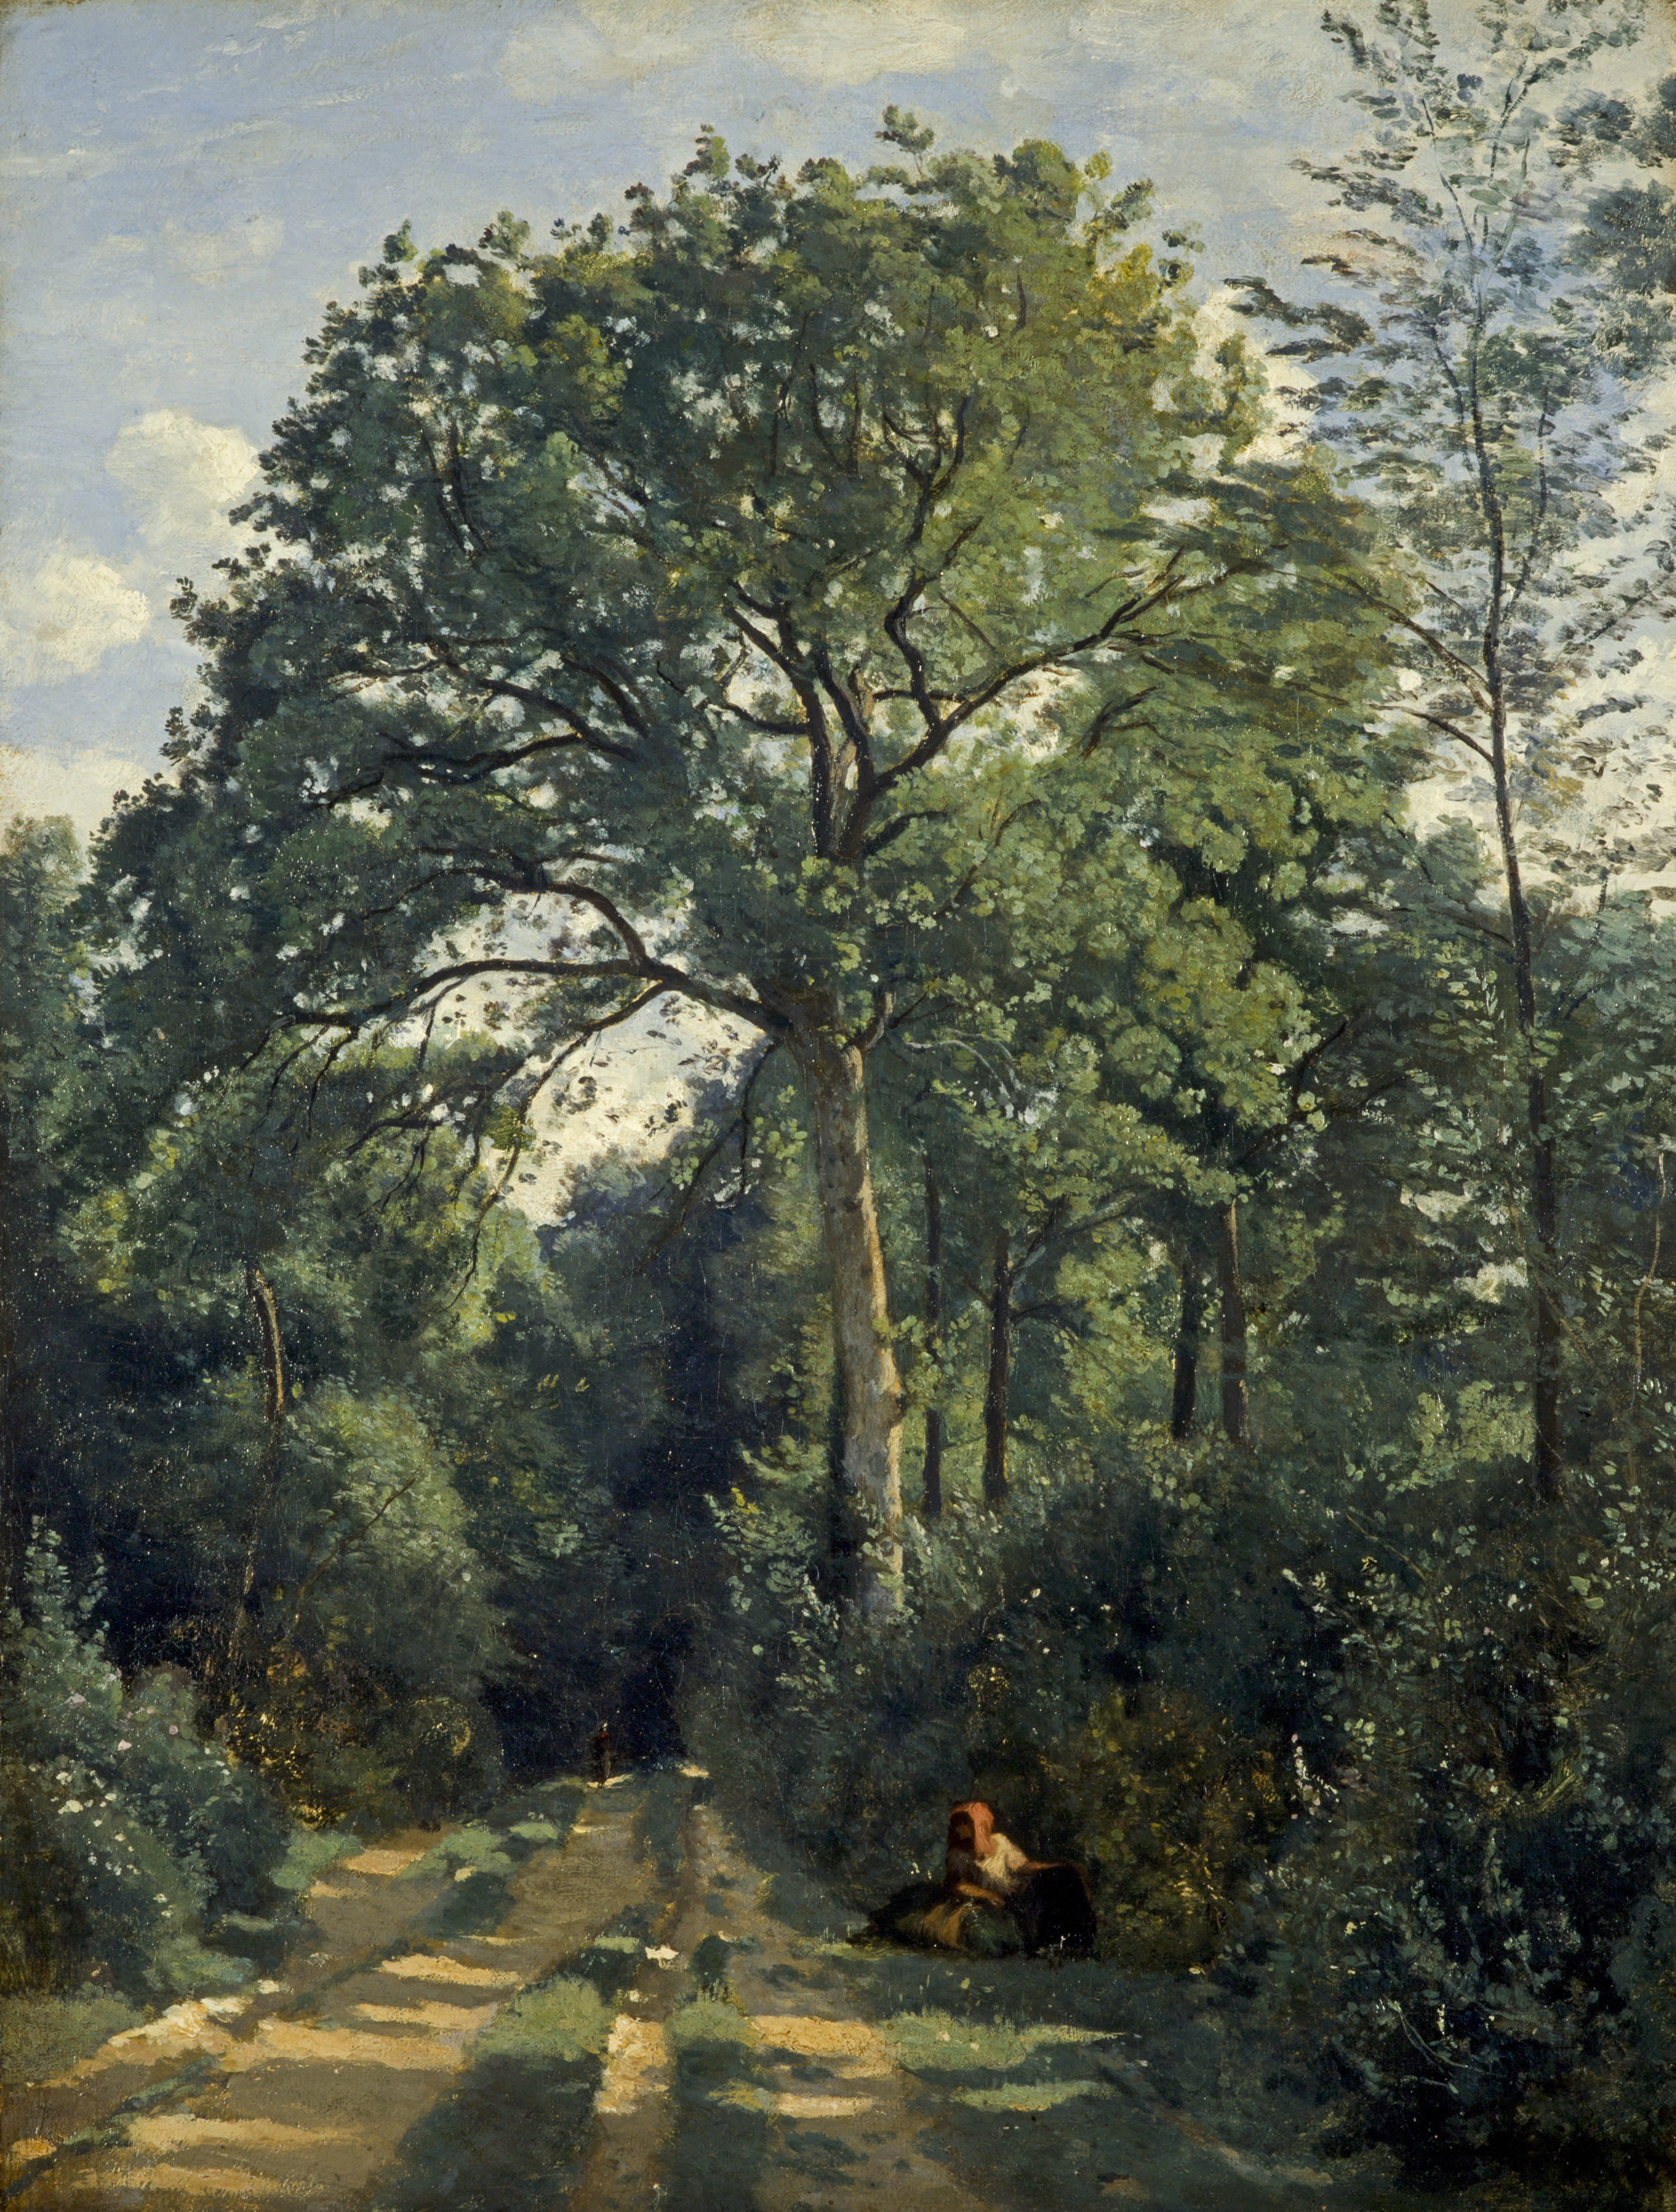 Camille Corot Ville-d'Avray: entrance to the wood c1825 oil on canvas 46 x 35 cm Scottish National Gallery, Edinburgh © Trustees of the National Galleries of Scotland ***This image may only be used in conjunction with editorial coverage of The Greats exhibition, 24 Oct 2015 - 14 Feb 2016, at the Art Gallery of New South Wales. This image may not be cropped or overwritten. Prior approval in writing required for use as a cover. Caption details must accompany reproduction of the image. *** Media contact: Lisa.Catt@ag.nsw.gov.au *** Local Caption *** ***This image may only be used in conjunction with editorial coverage of The Greats exhibition, 24 Oct 2015 - 14 Feb 2016, at the Art Gallery of New South Wales. This image may not be cropped or overwritten. Prior approval in writing required for use as a cover. Caption details must accompany reproduction of the image. *** Media contact: Lisa.Catt@ag.nsw.gov.au